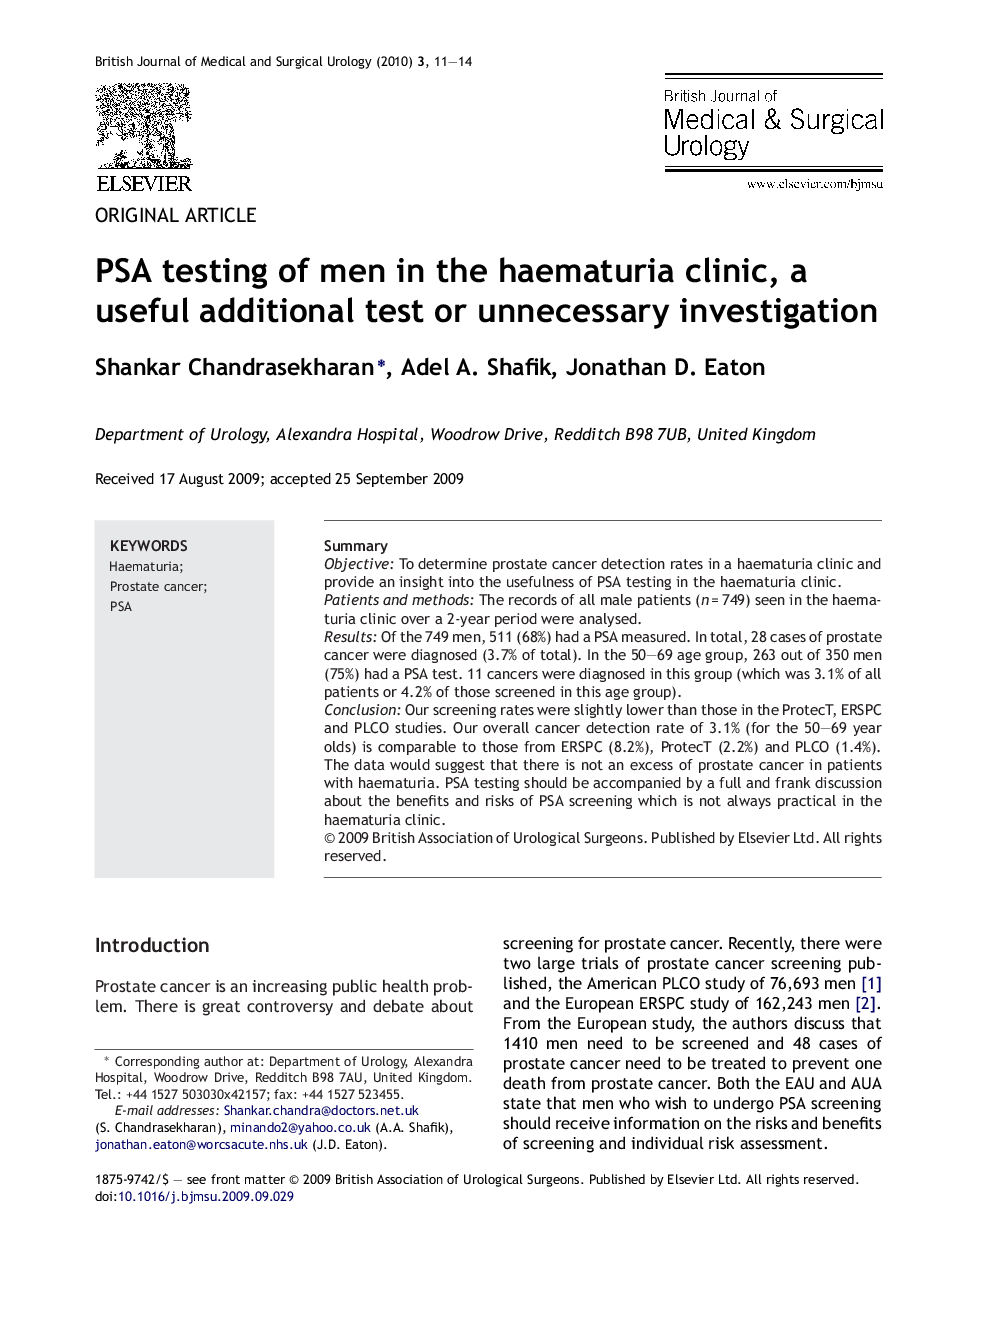 PSA testing of men in the haematuria clinic, a useful additional test or unnecessary investigation